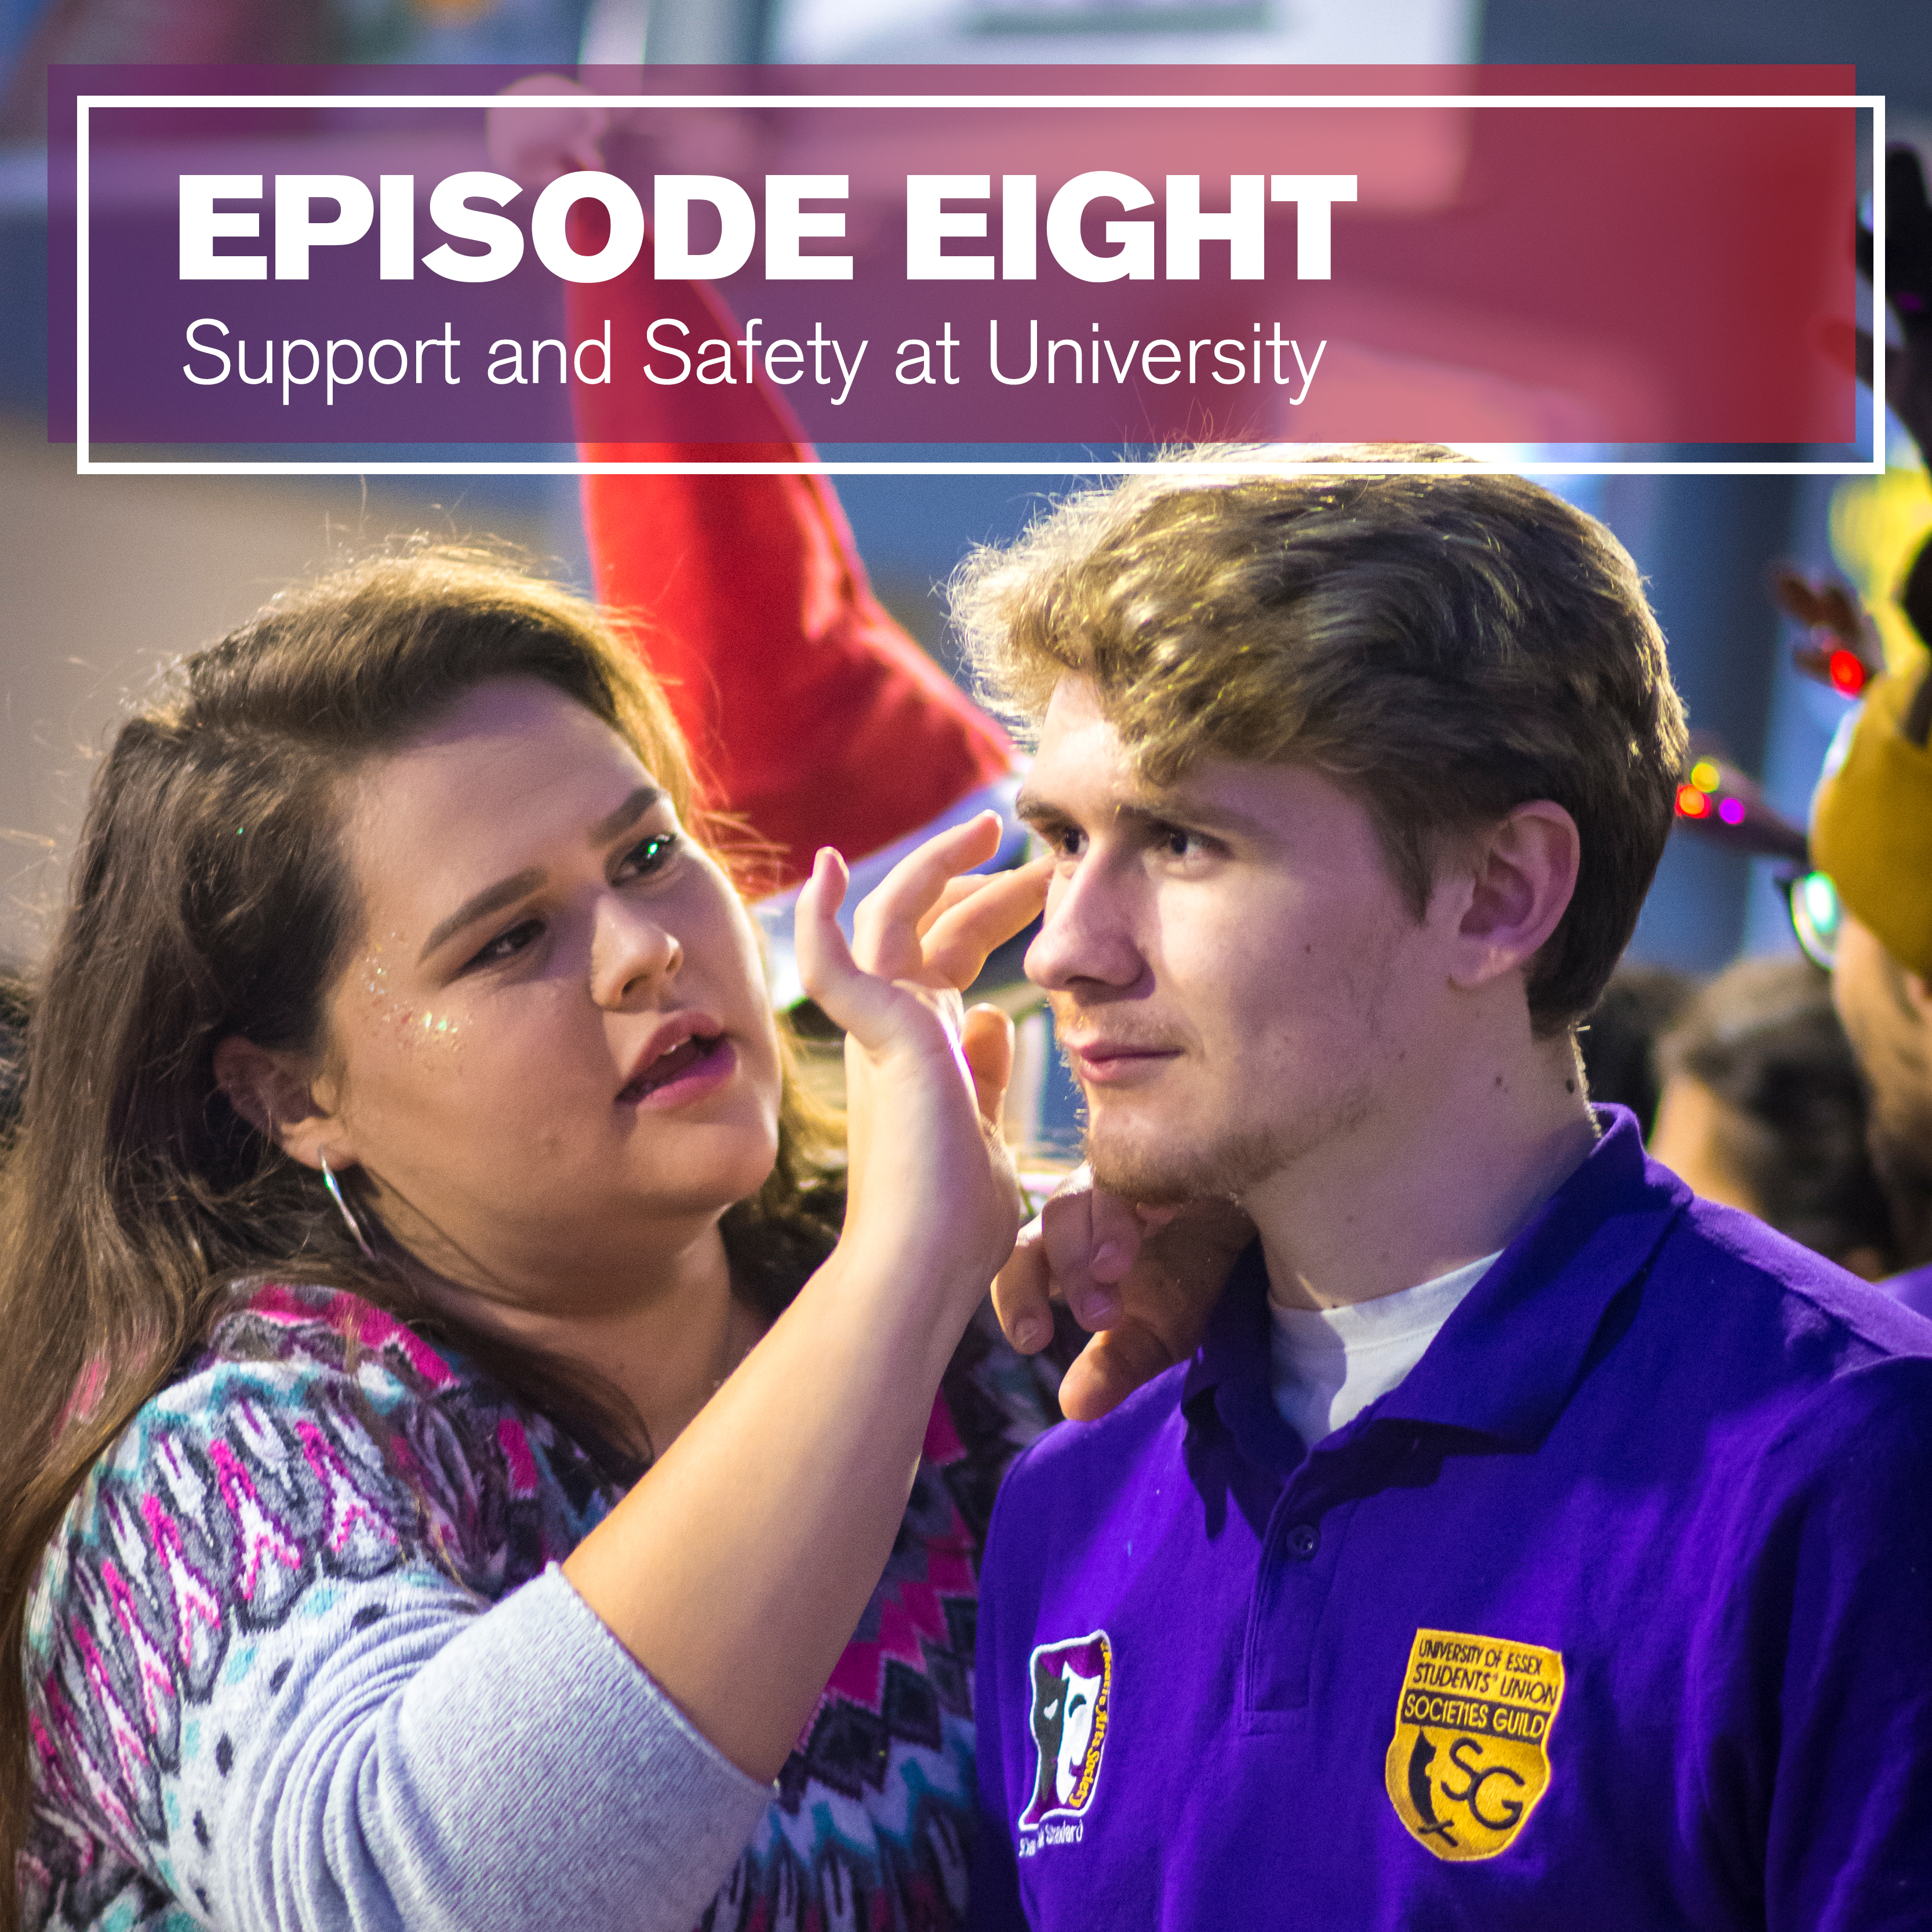 Support and Safety at University